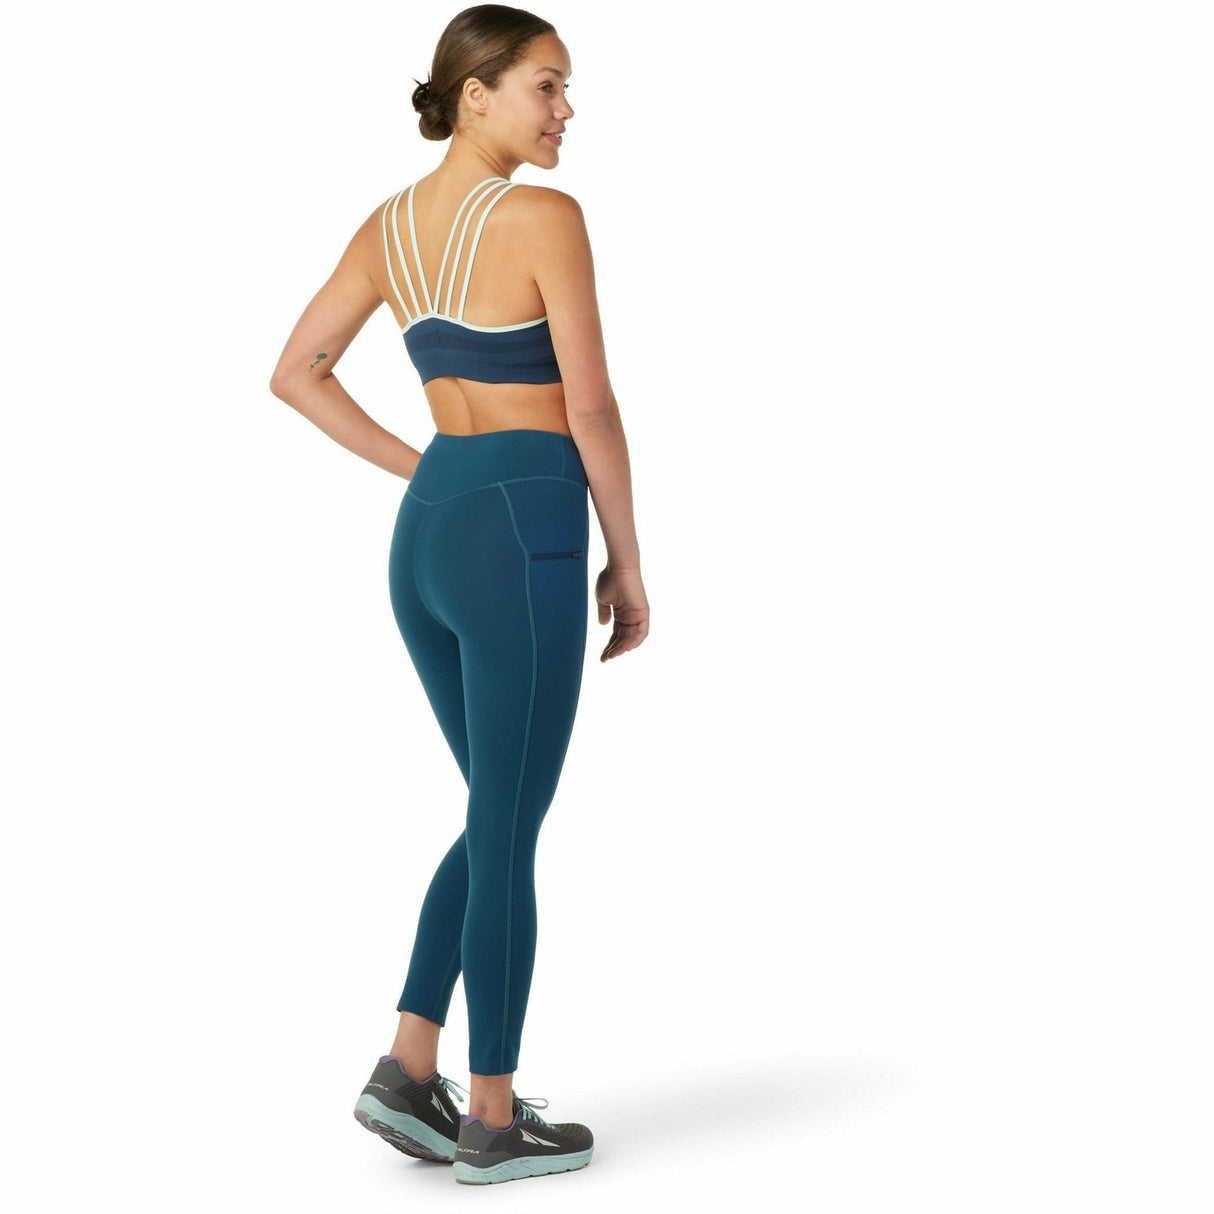 Smartwool Womens Active 7/8 Leggings - Clearance  - 